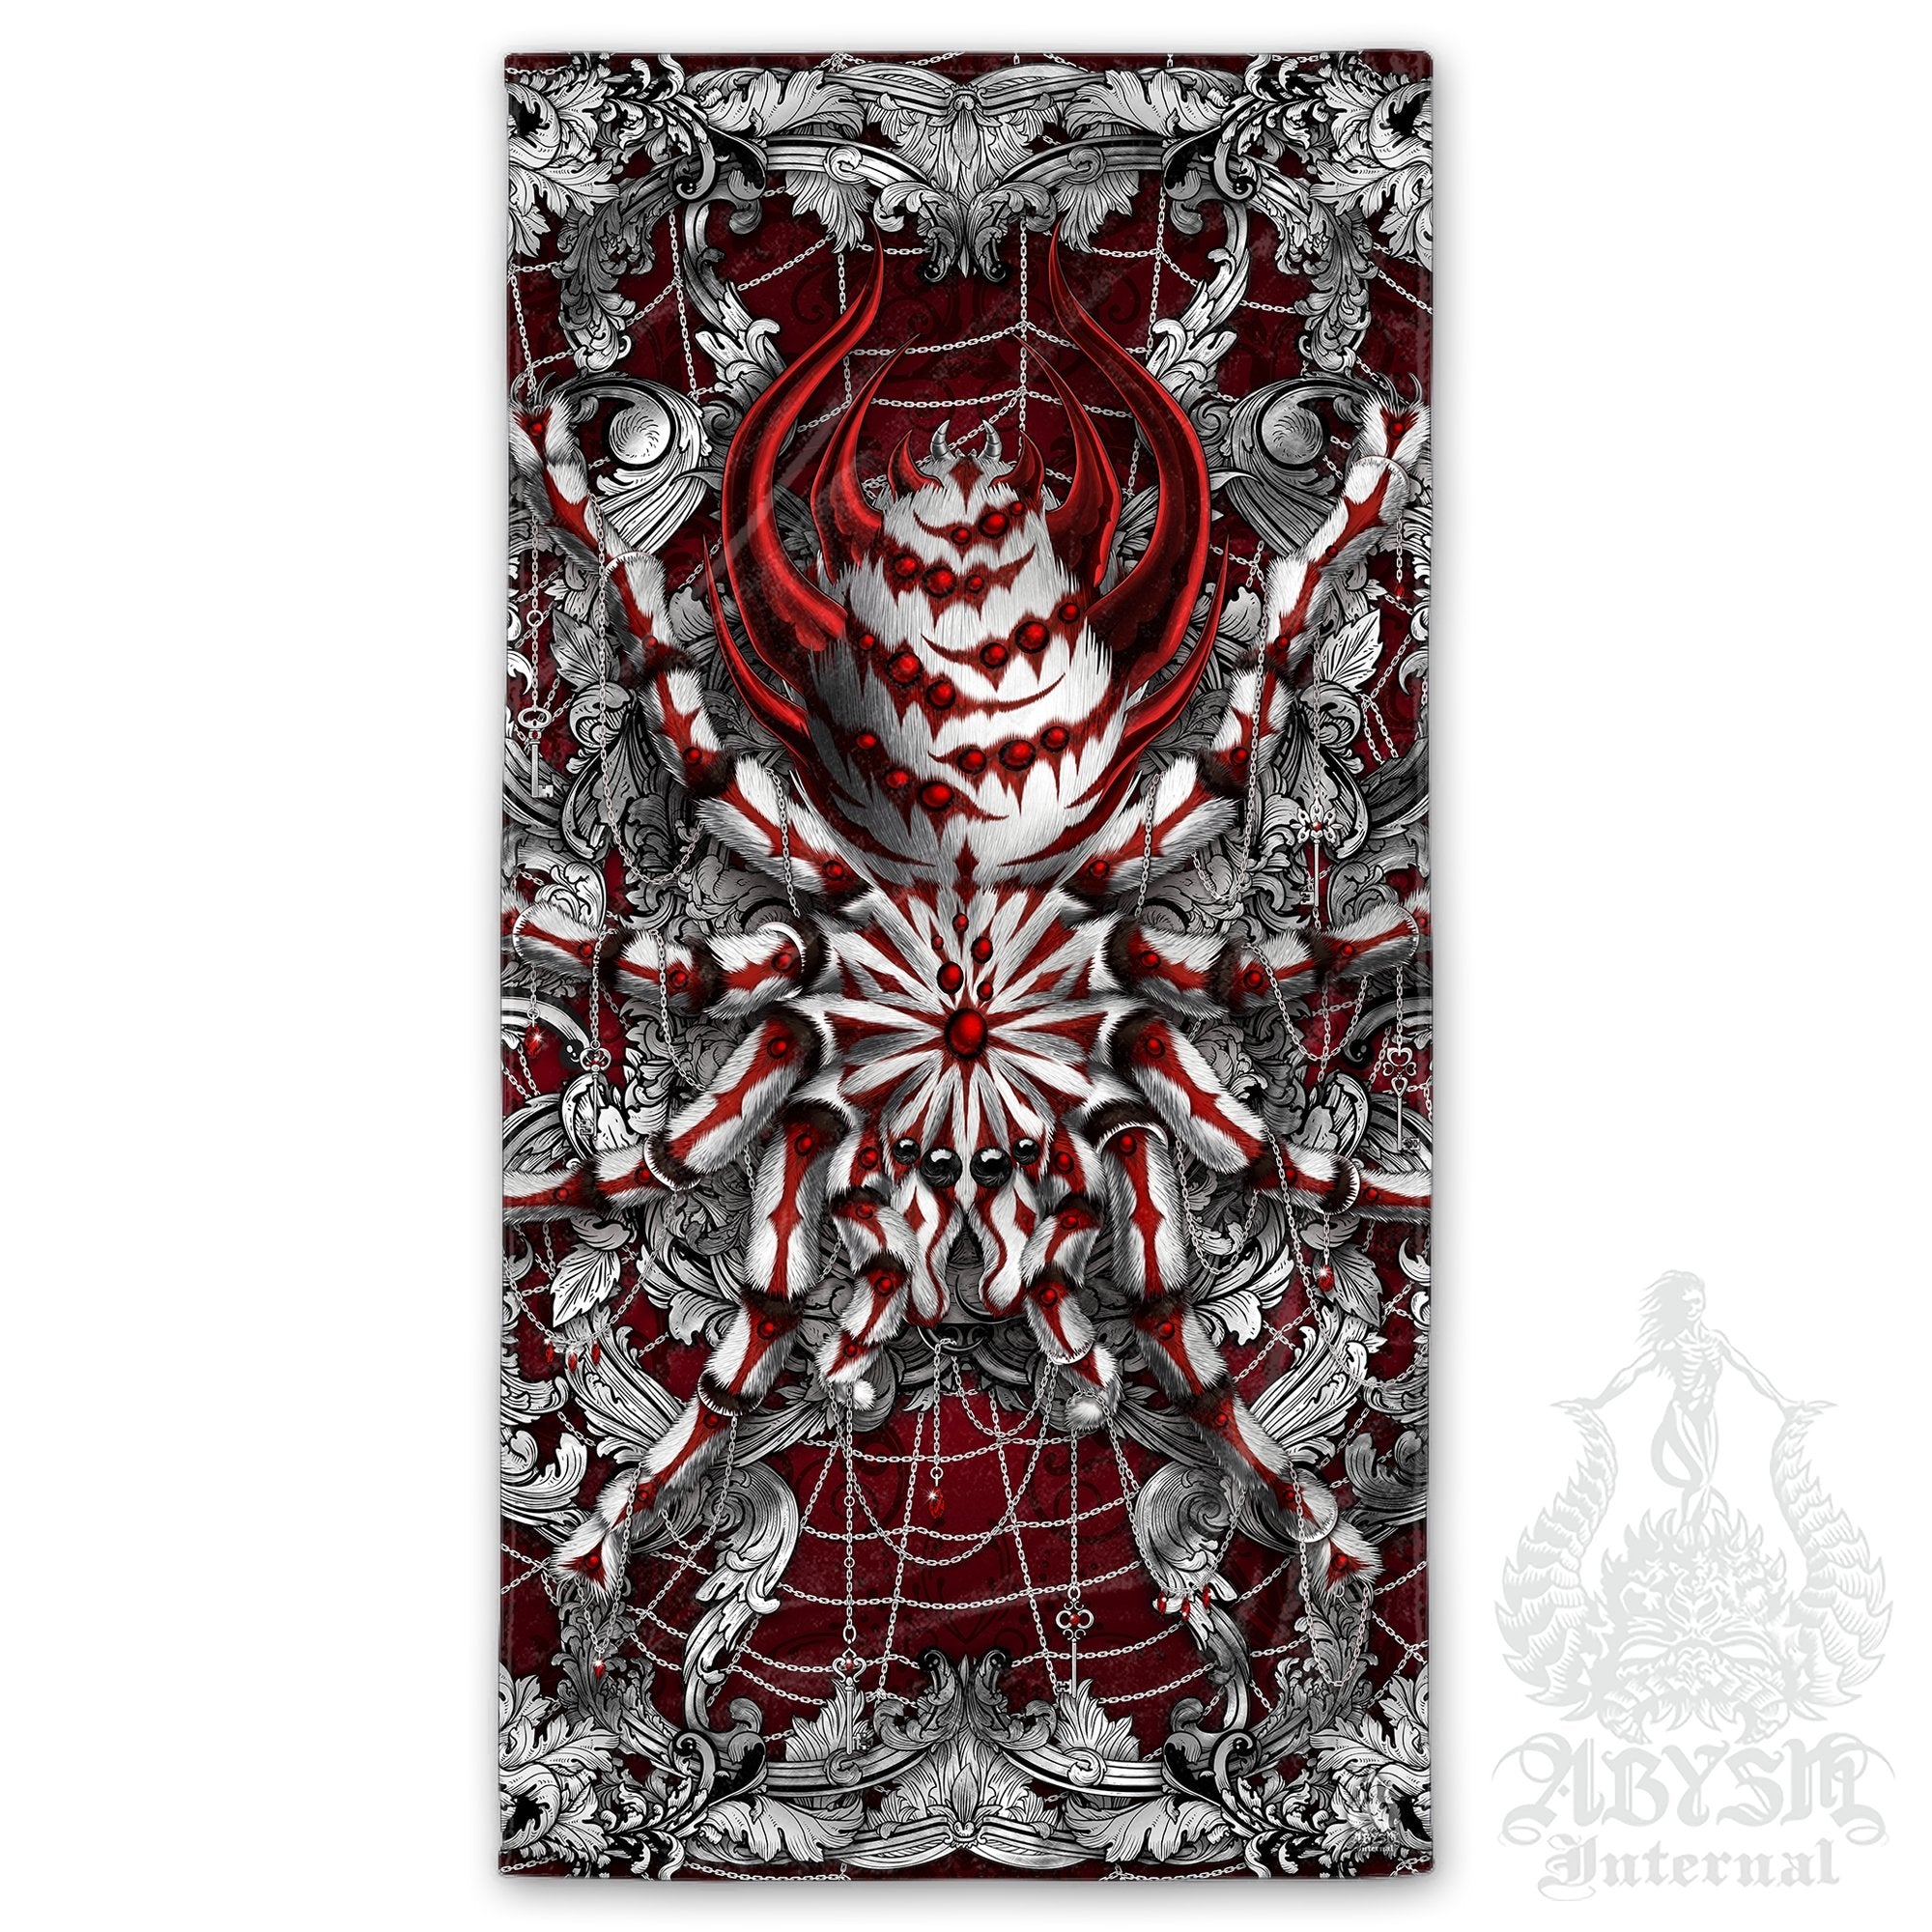 Spider Beach Towel, Indie Art Print, Gift for Tarantula Lovers - Silver Red - Abysm Internal